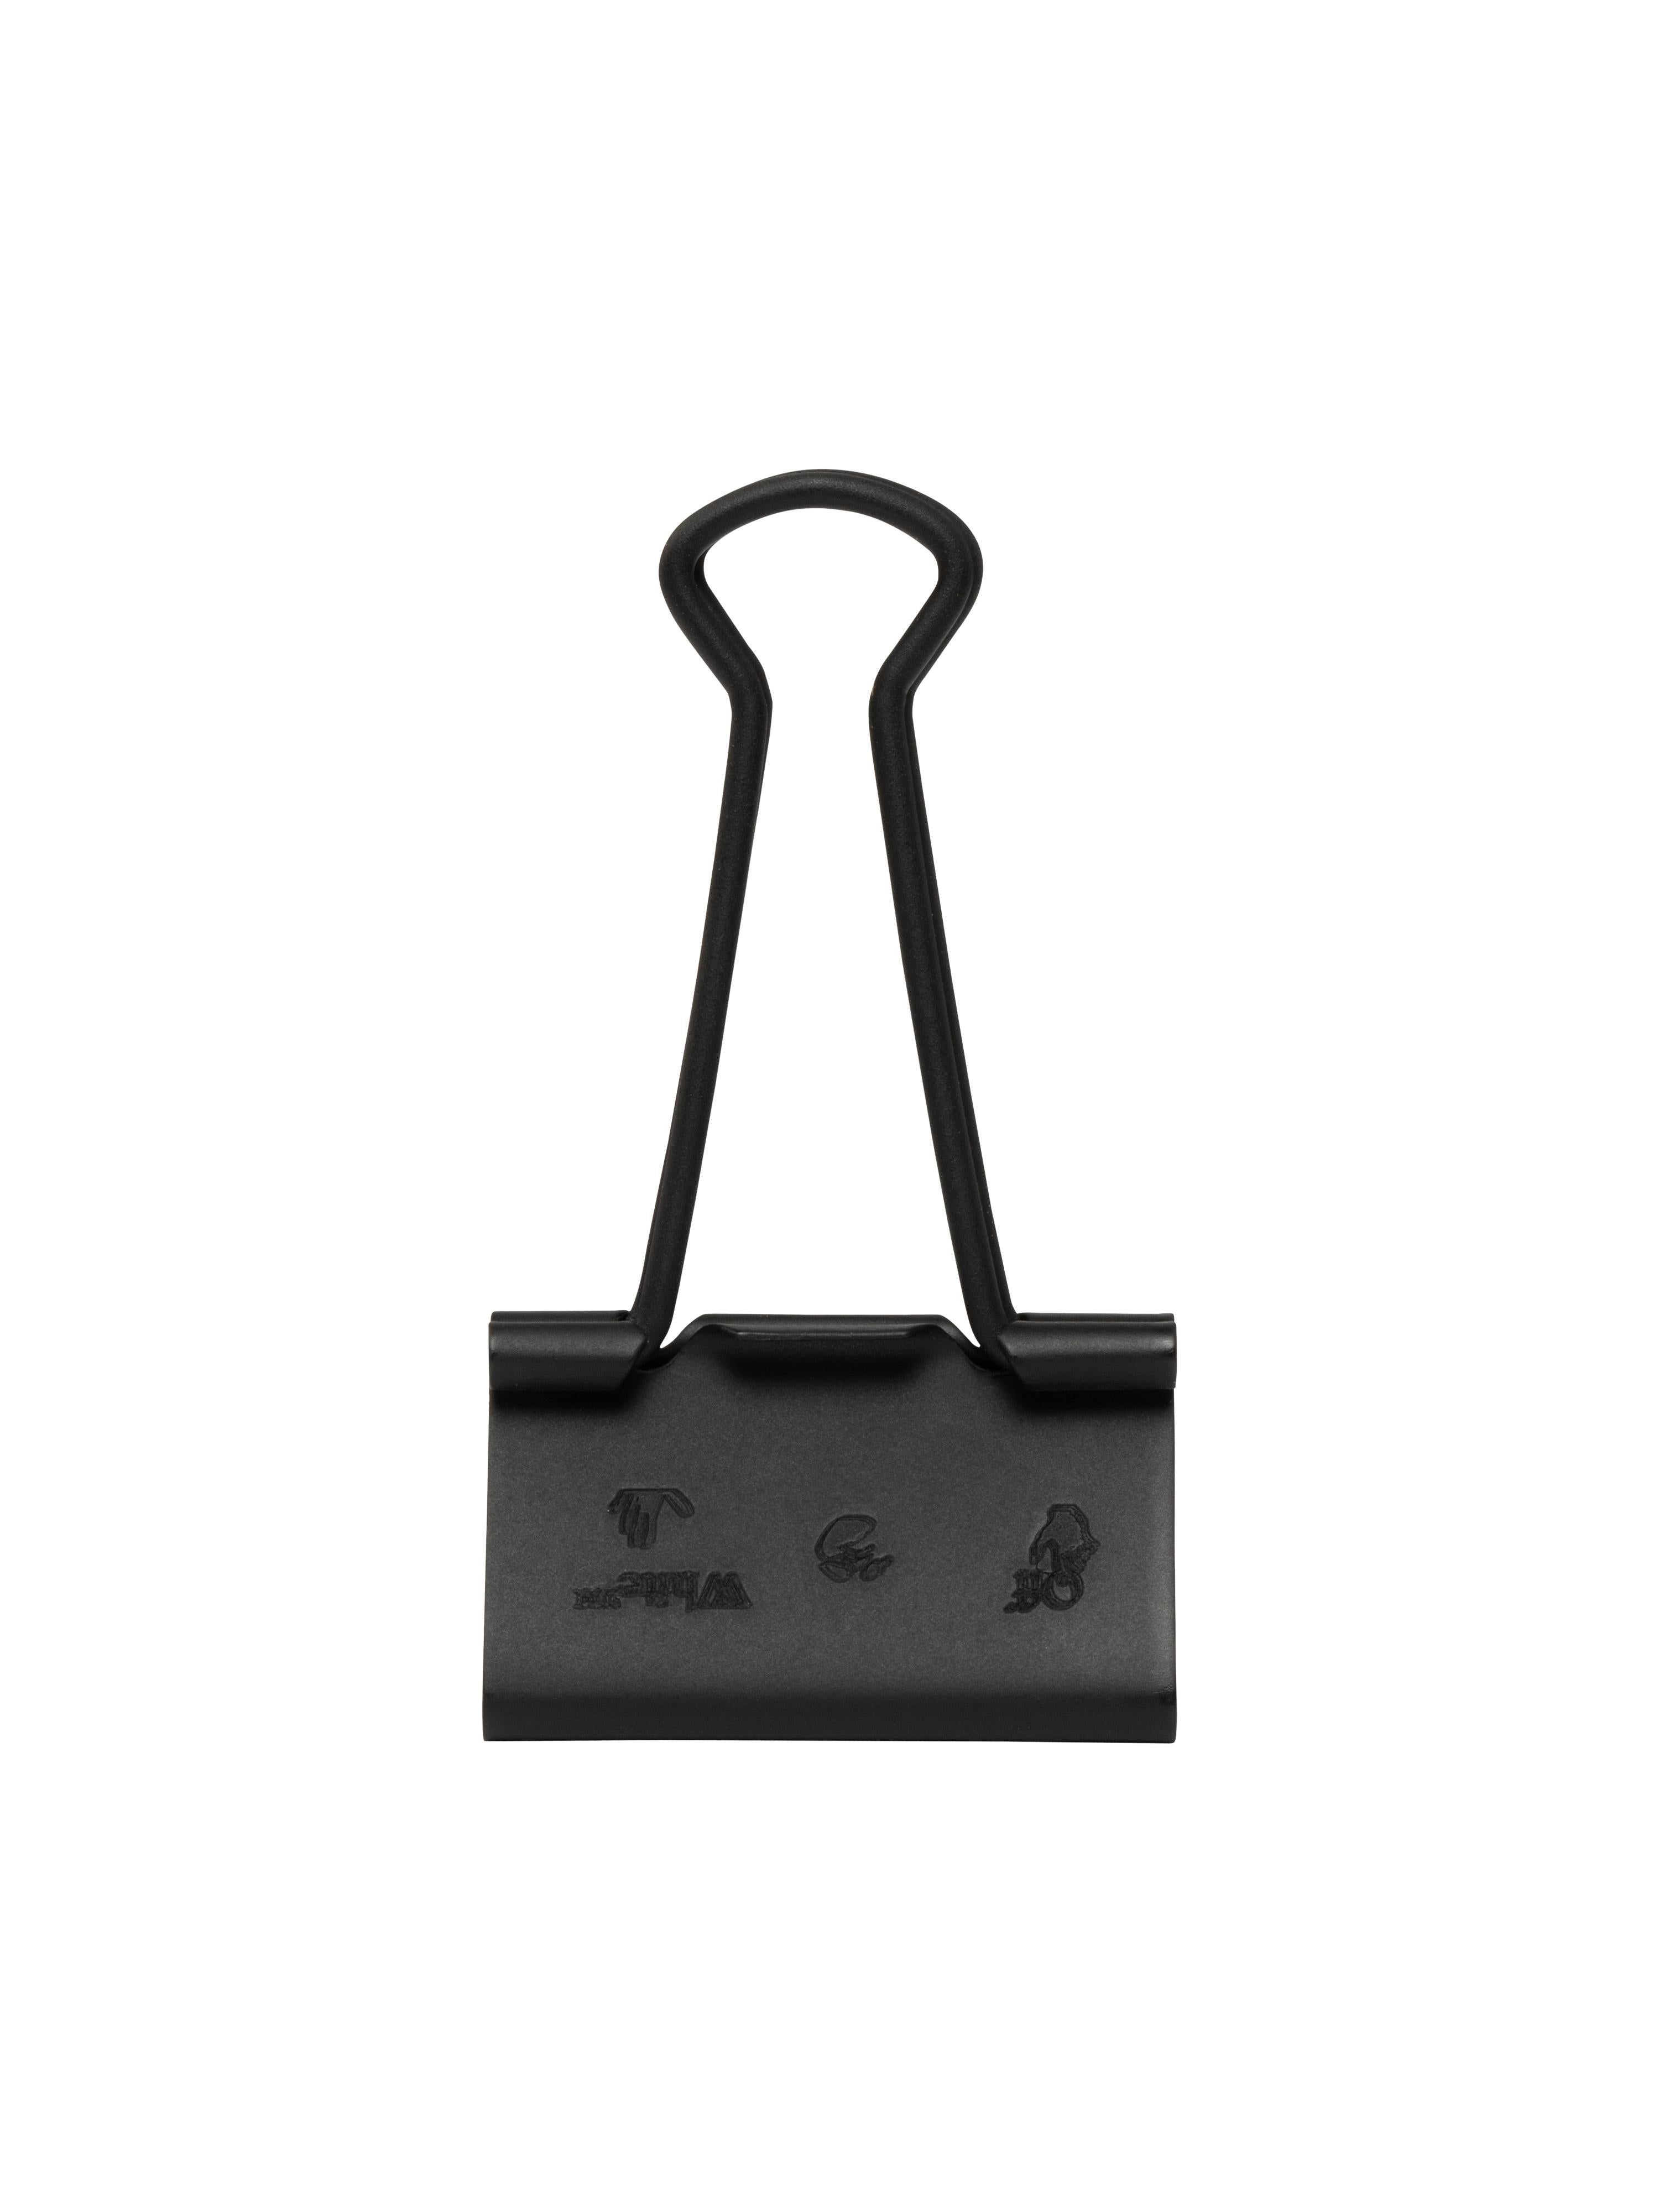 Stationary Binder clip in Matt black with Man swimming logo impressed.
By Virgil Abloh
Dimensions: 6 W x 3.5 H
This item is only available to be purchased and shipped to the United States.